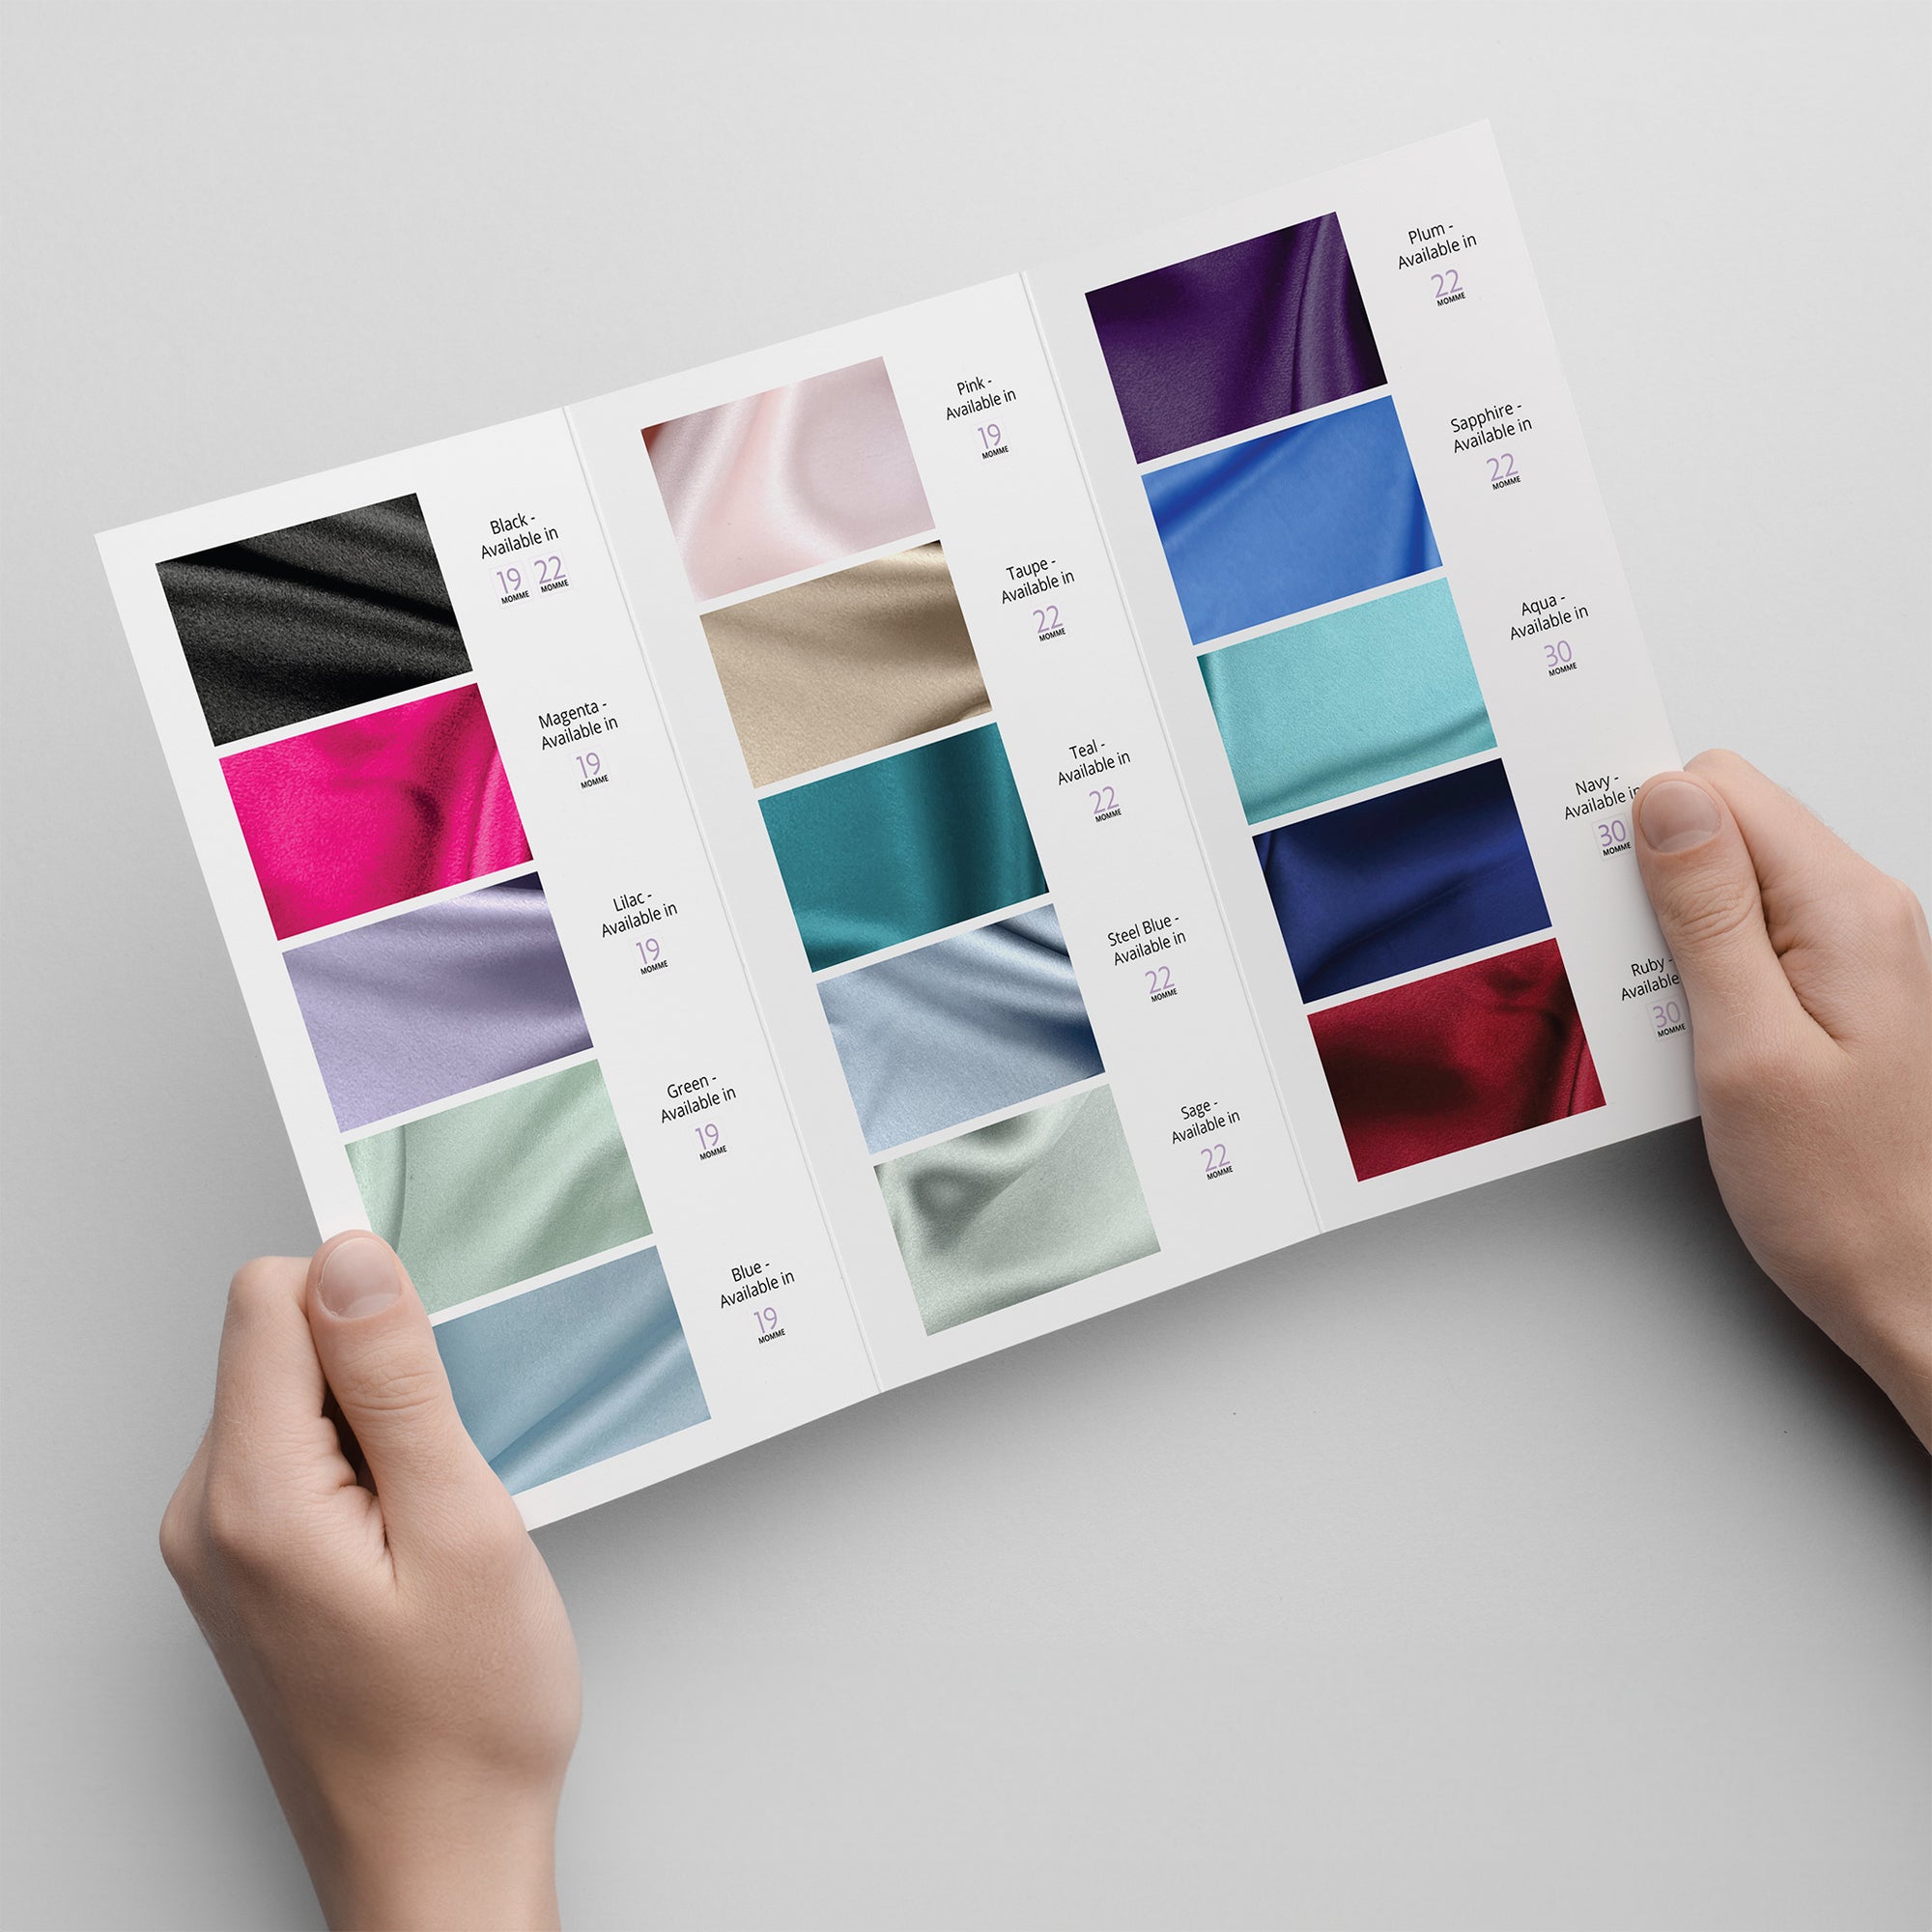 Our silk color swatch booklet allows you to see our silk colors in real life before purchasing so you can be confident in your choices and love your new silk products